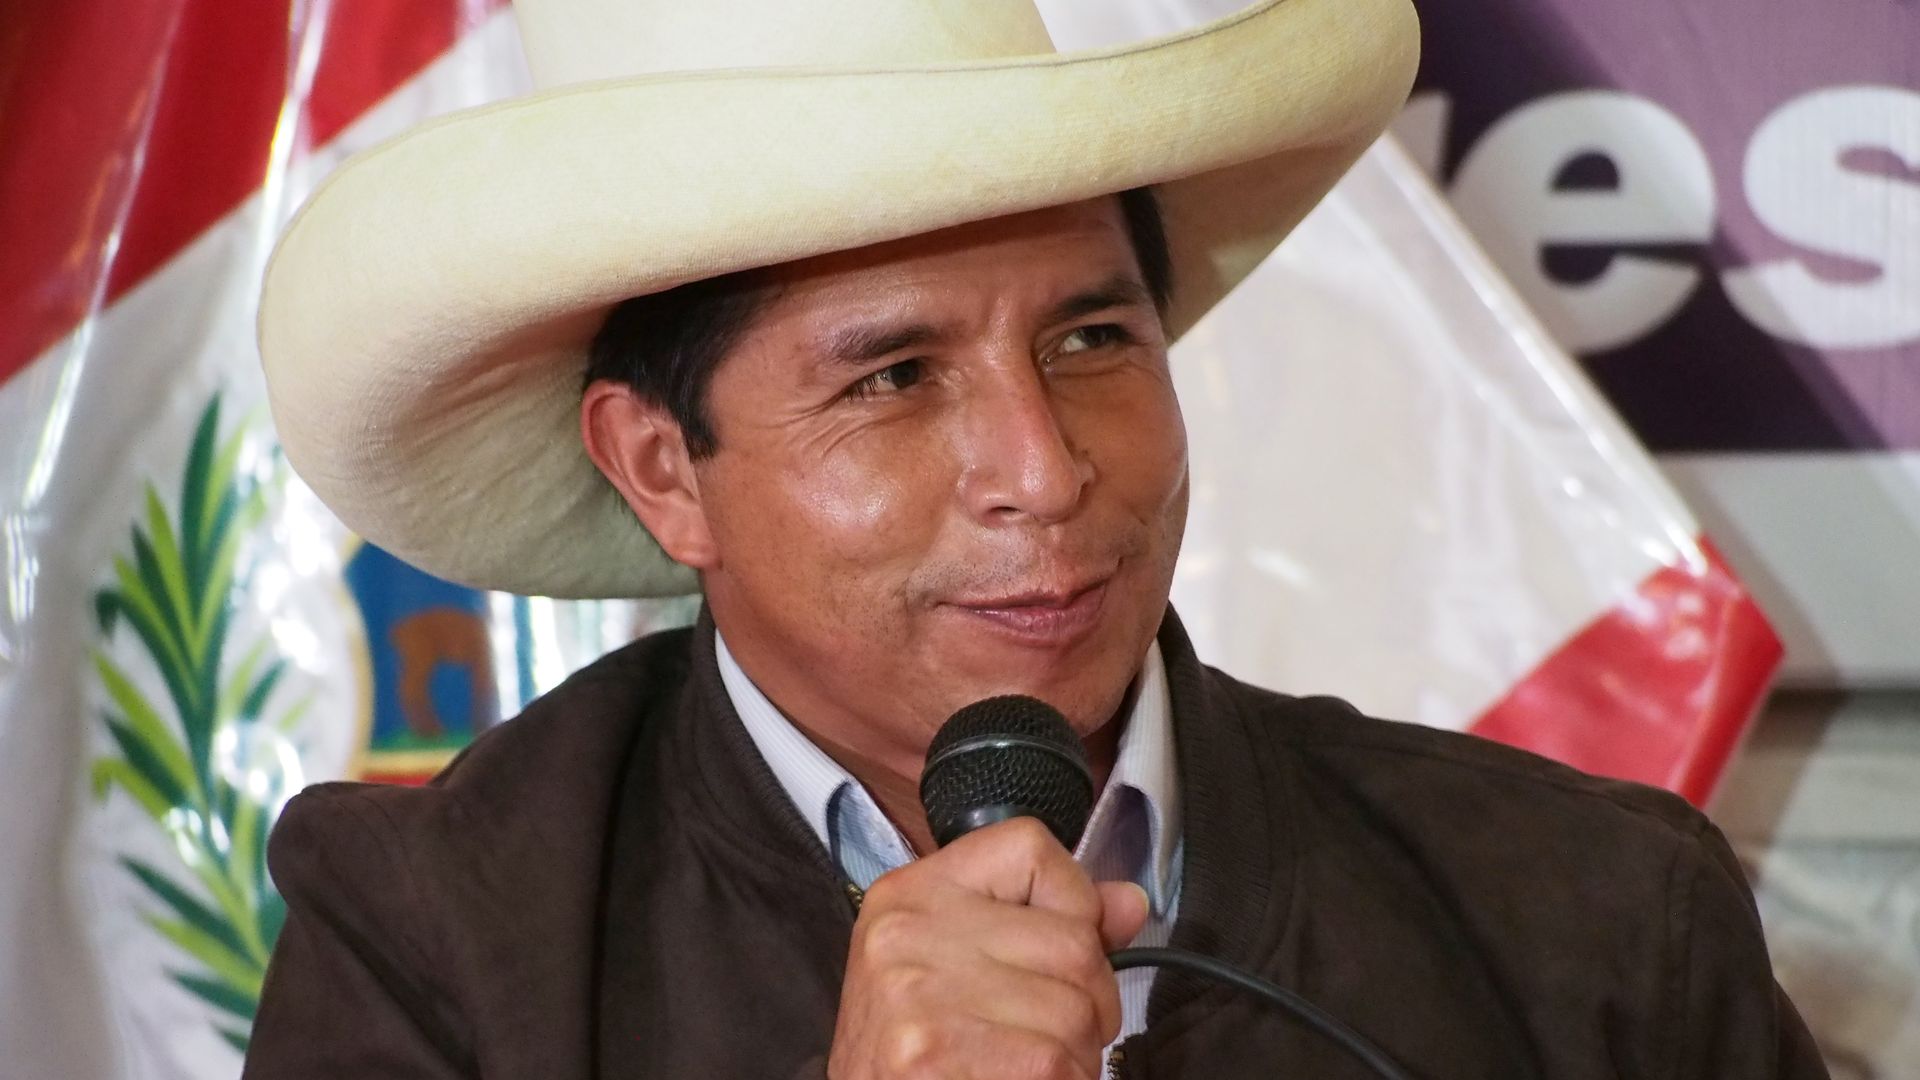  Pedro Castillo, Leftist candidate to the presidency of Peru by Peru Libre party, gives a press conference  in Peru on July 15.